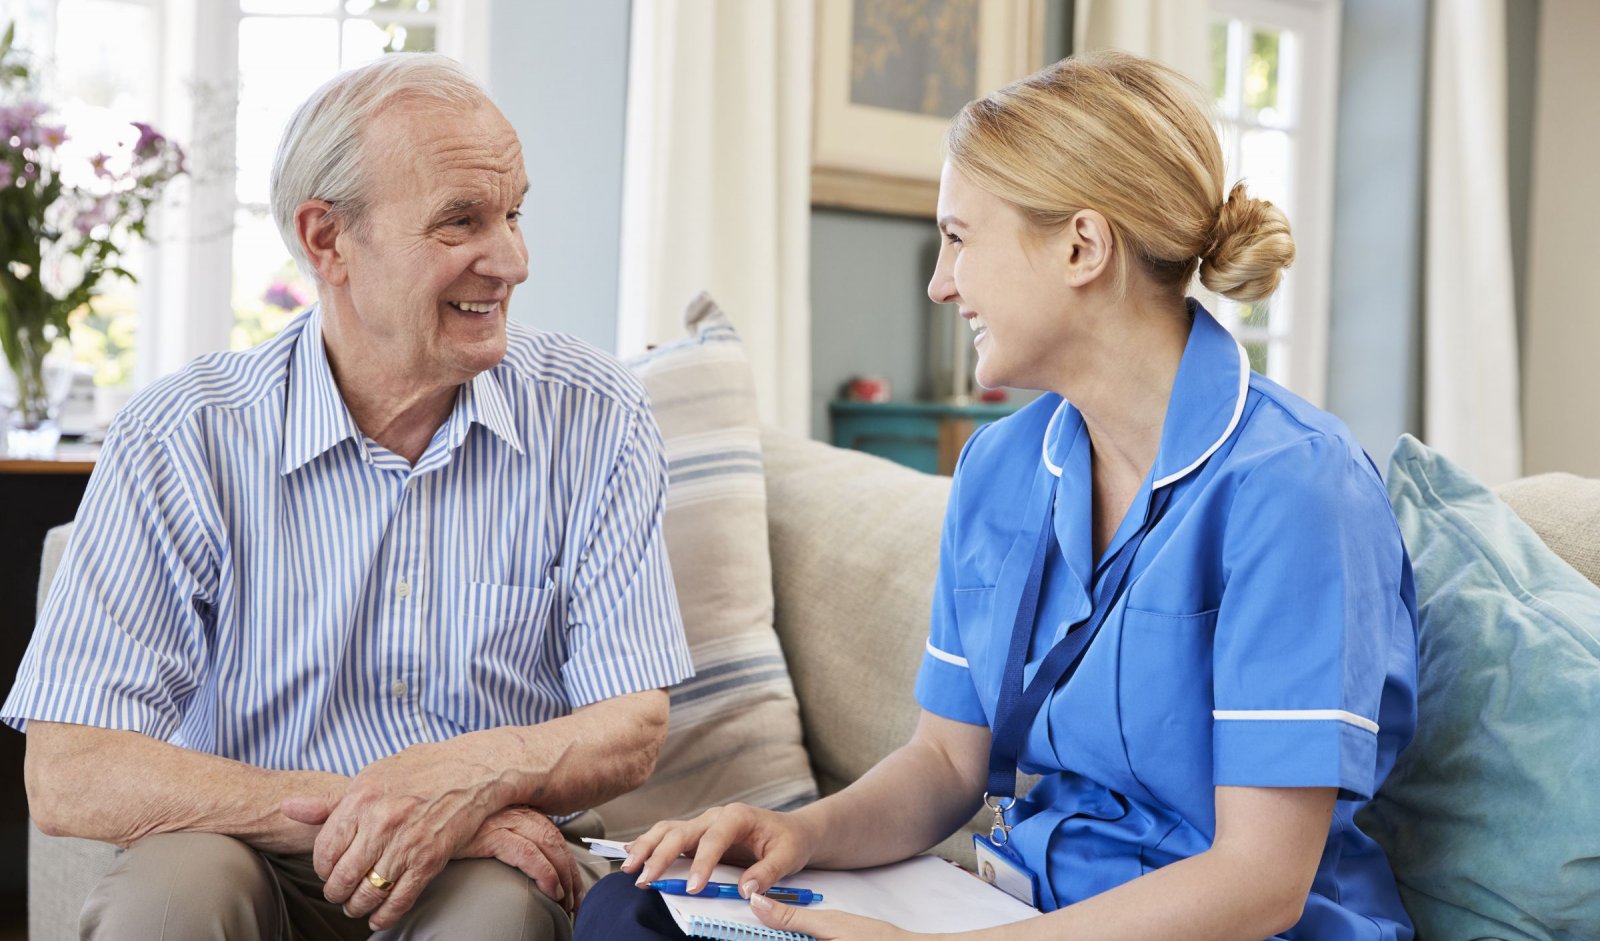 A senior man and his nurse smile as they have a discussion